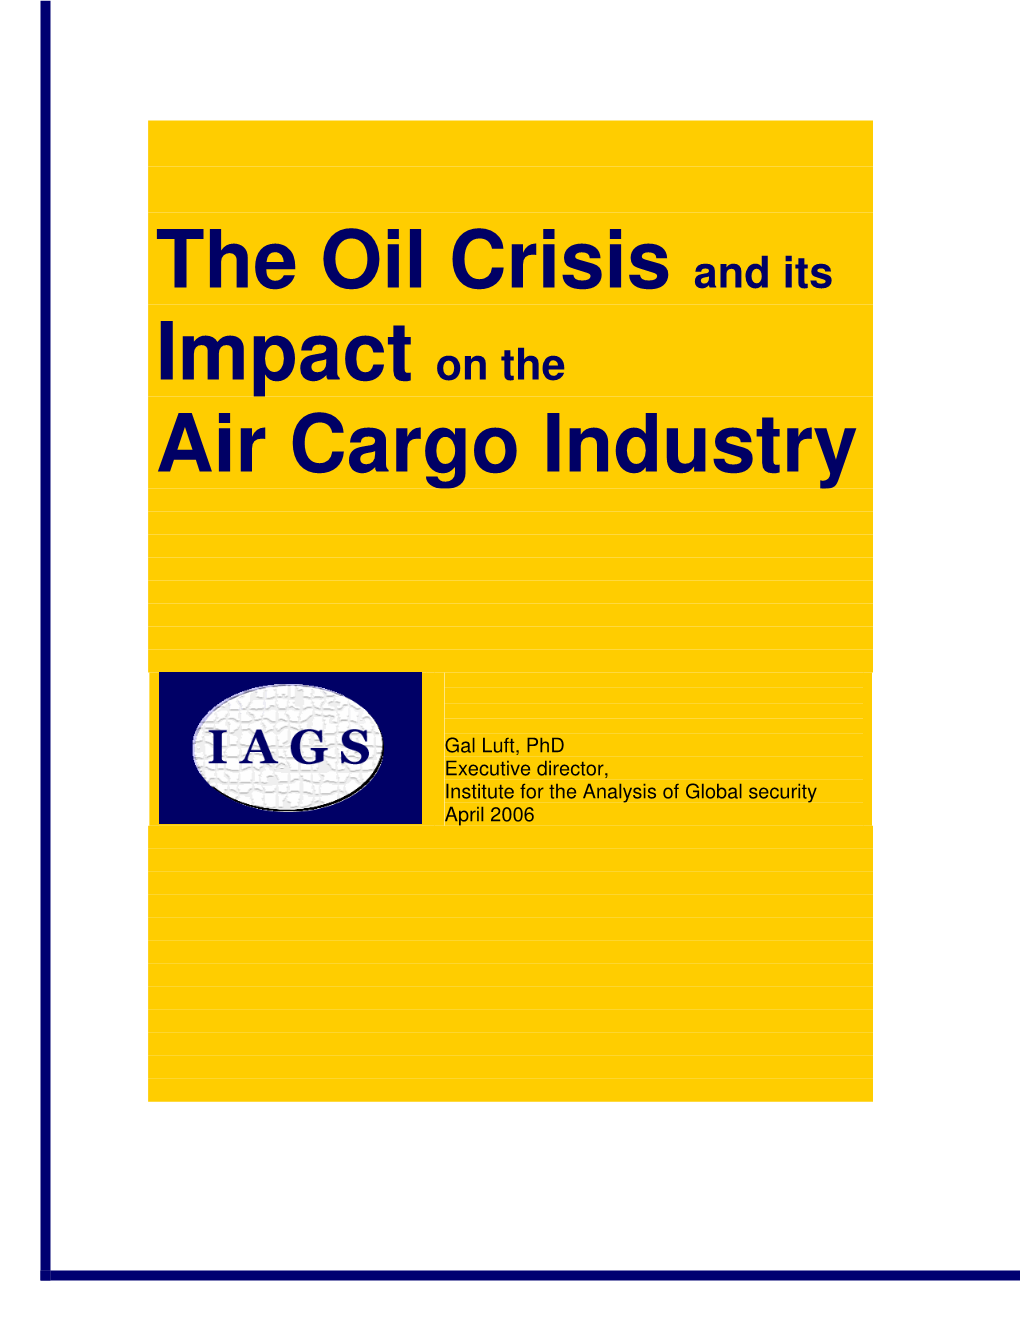 The Oil Crisis and Its Impact on the Air Cargo Industry